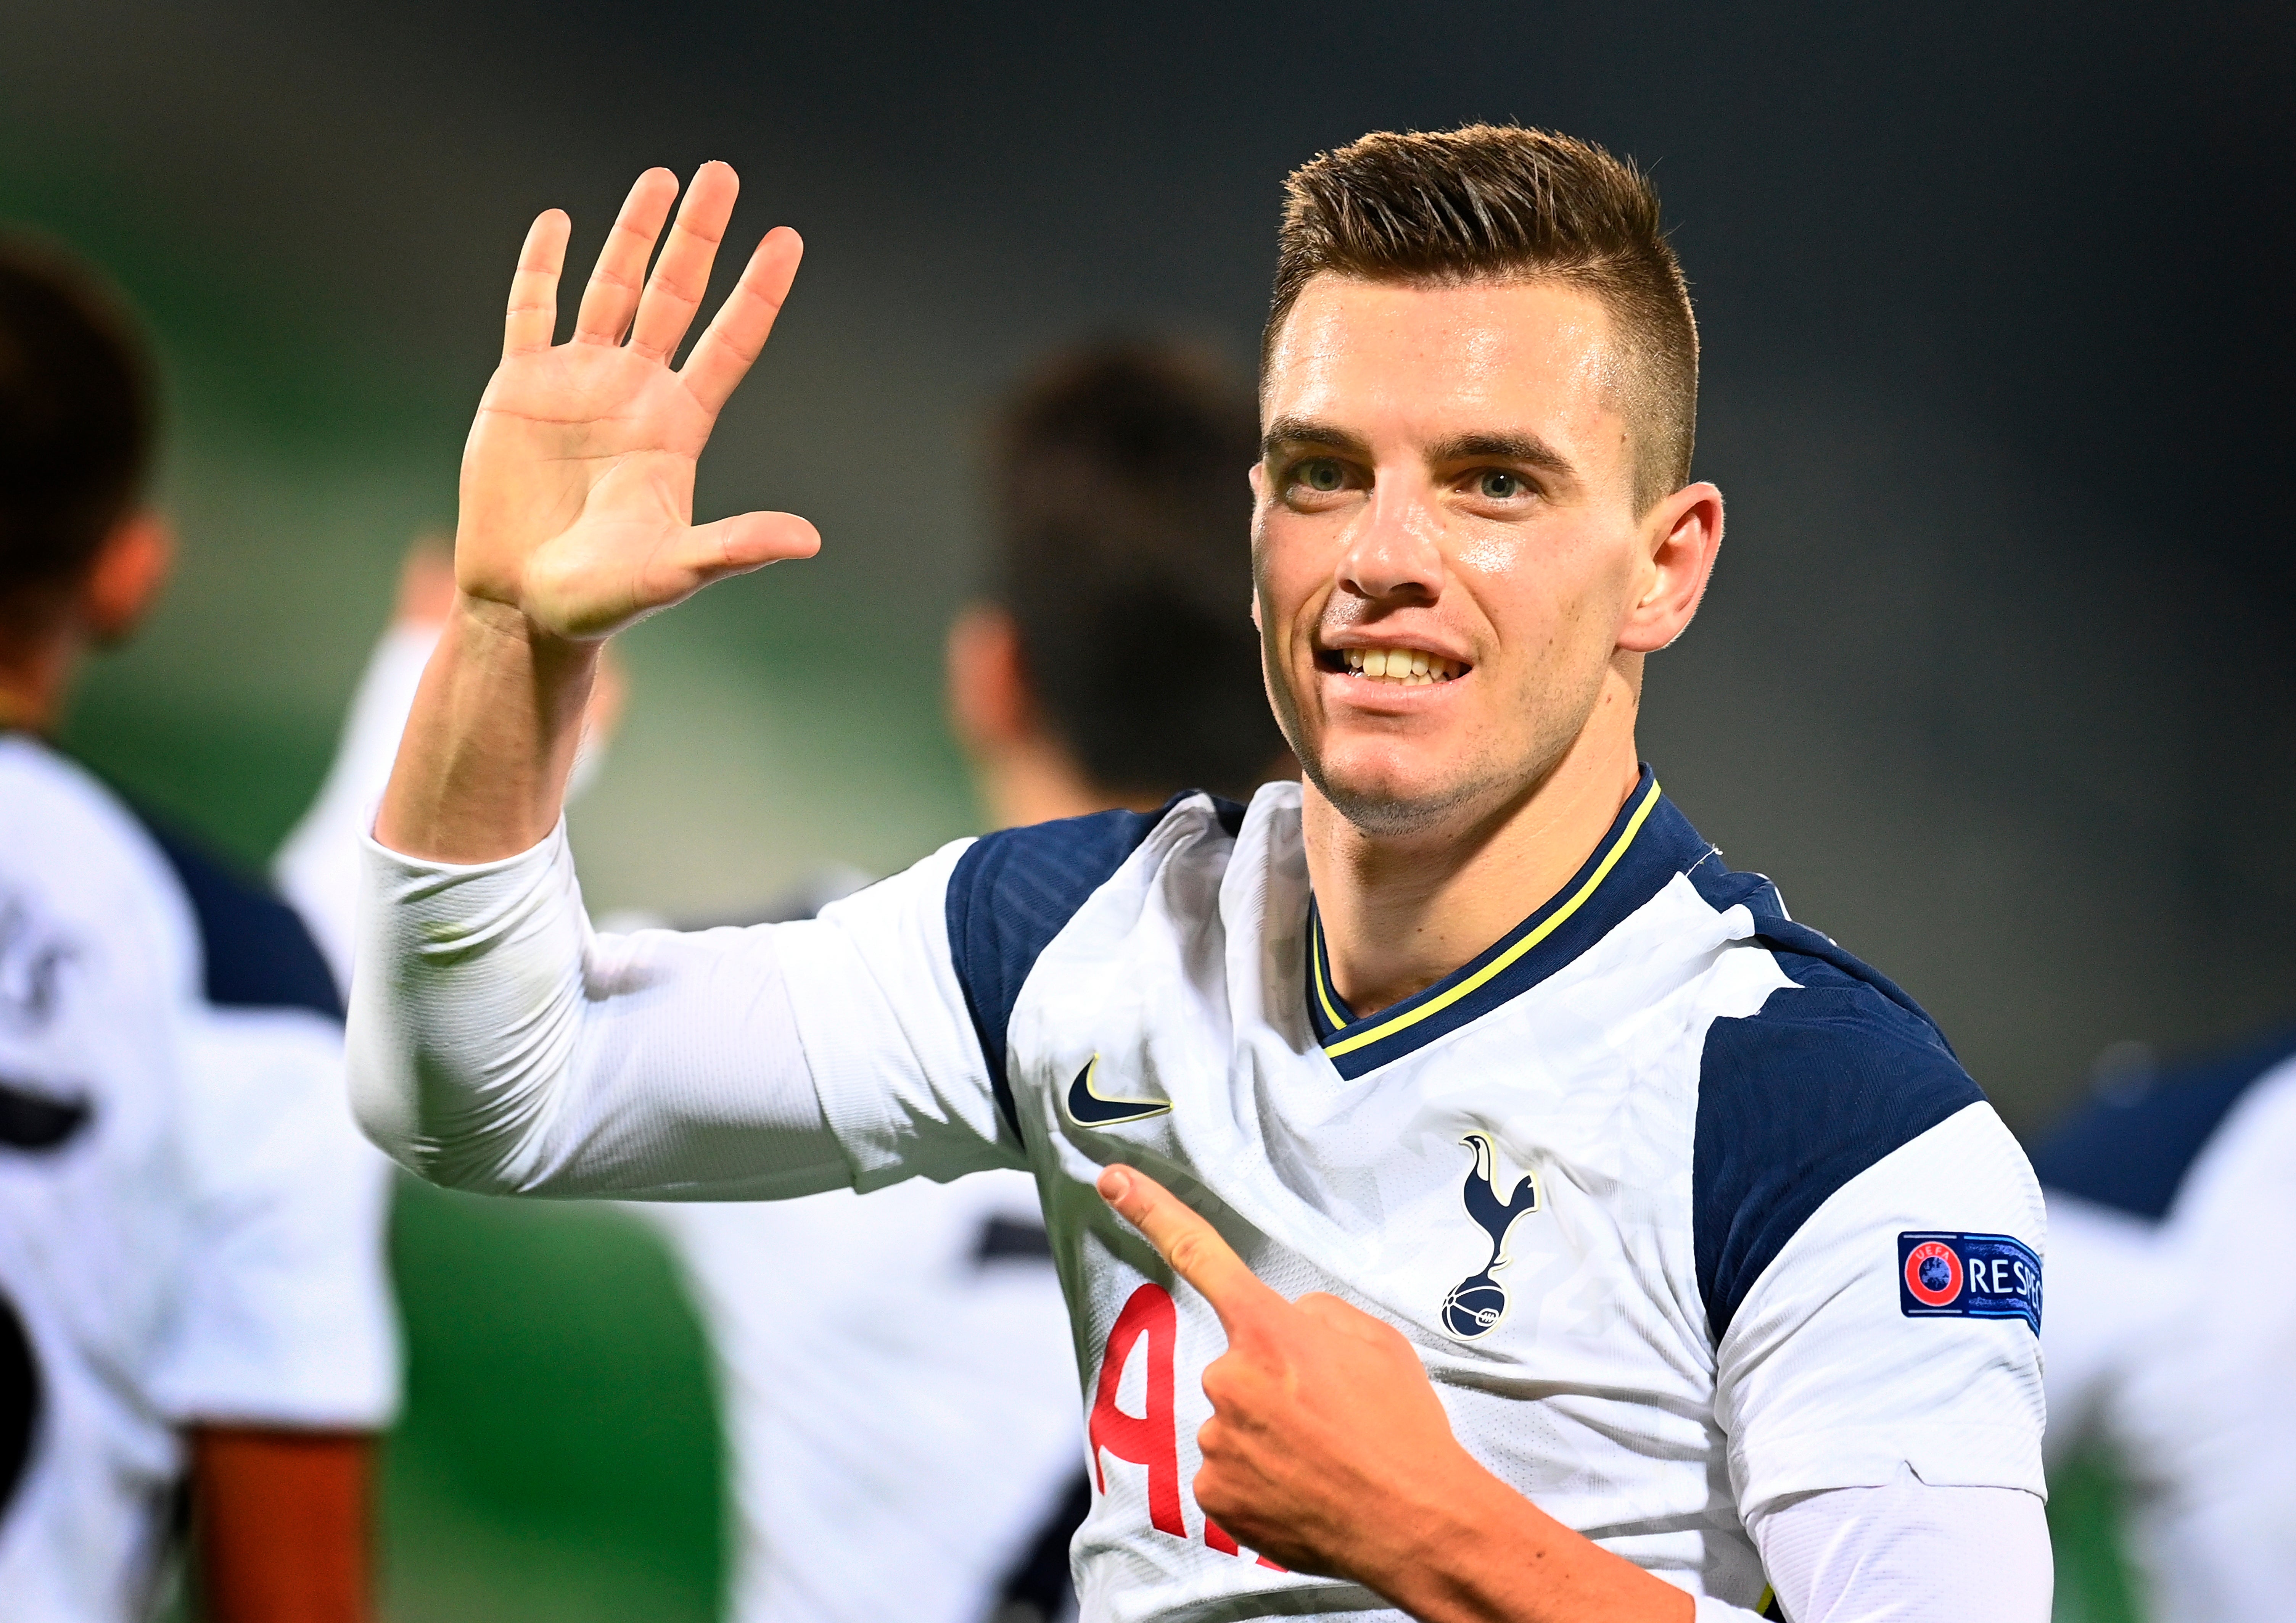 Giovani Lo Celso celebrates after scoring for Spurs